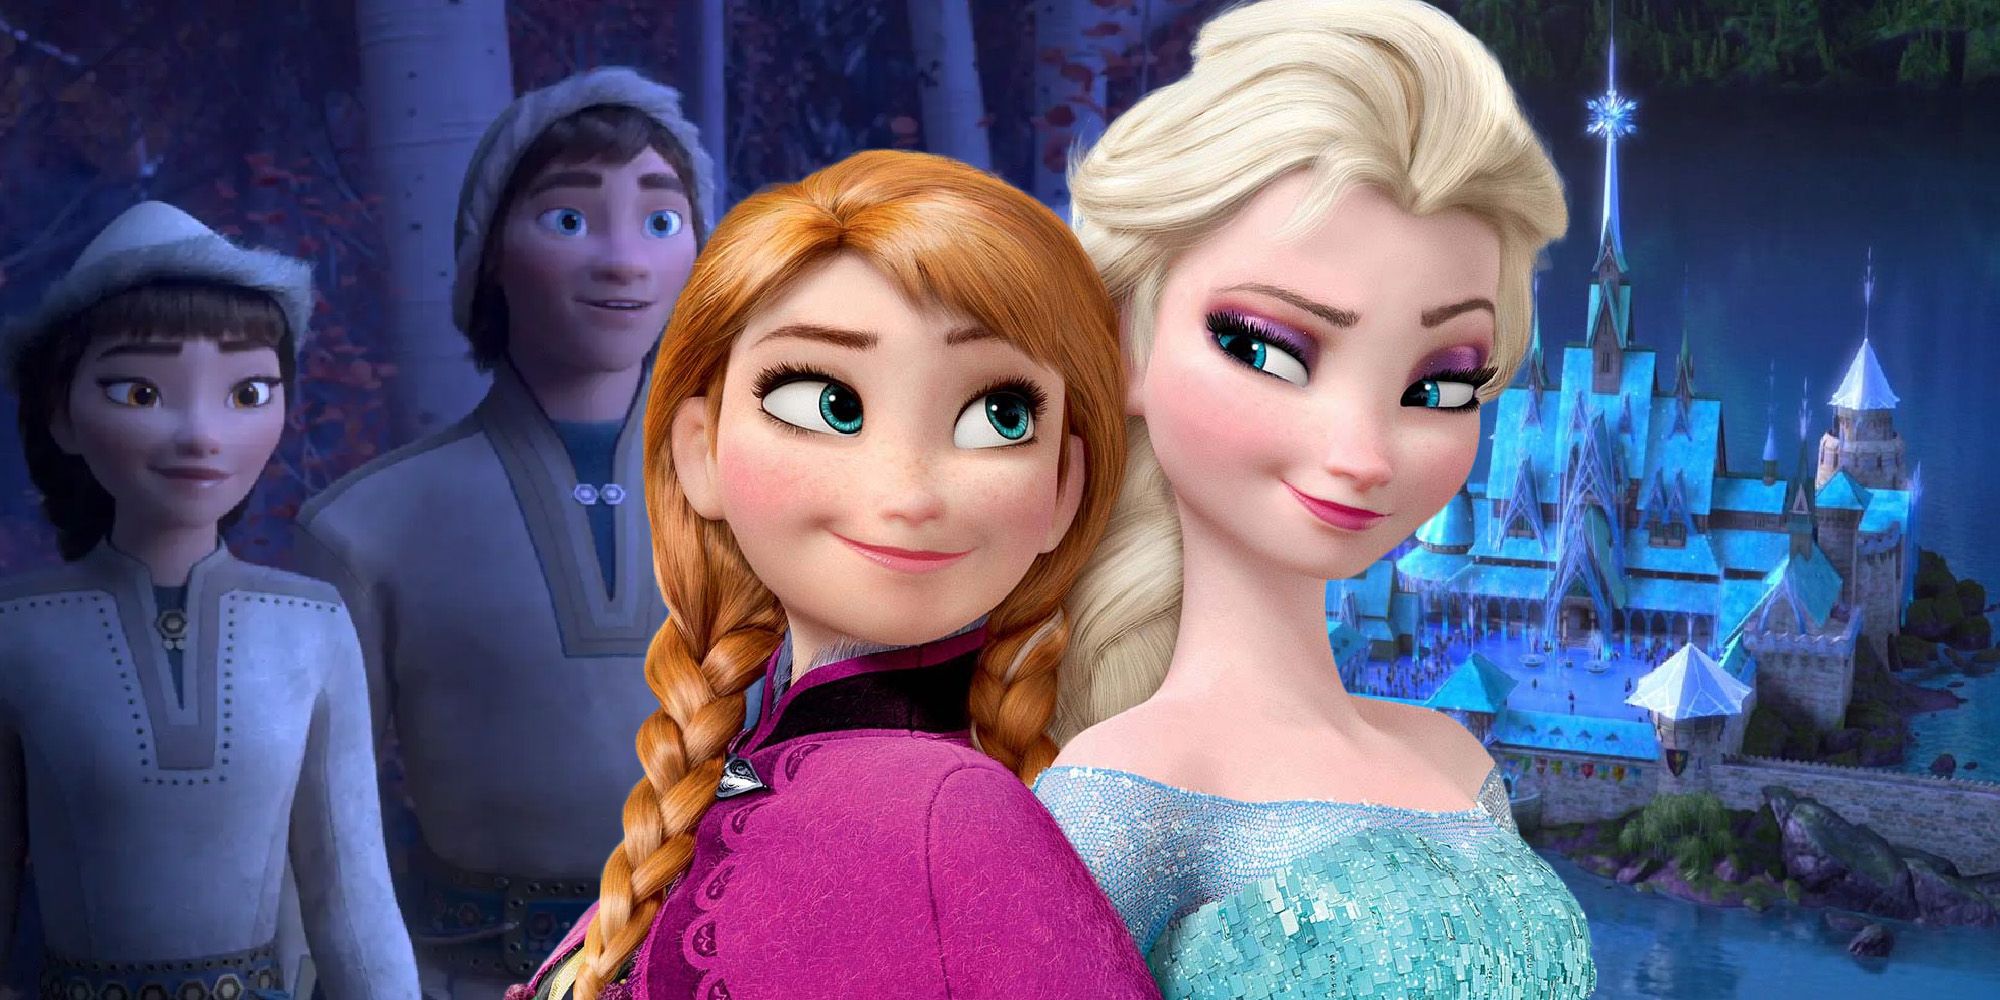 Frozen Why Elsa & Anna Should Celebrate Christmas (Holidays) With The Northuldra Not Arendelle